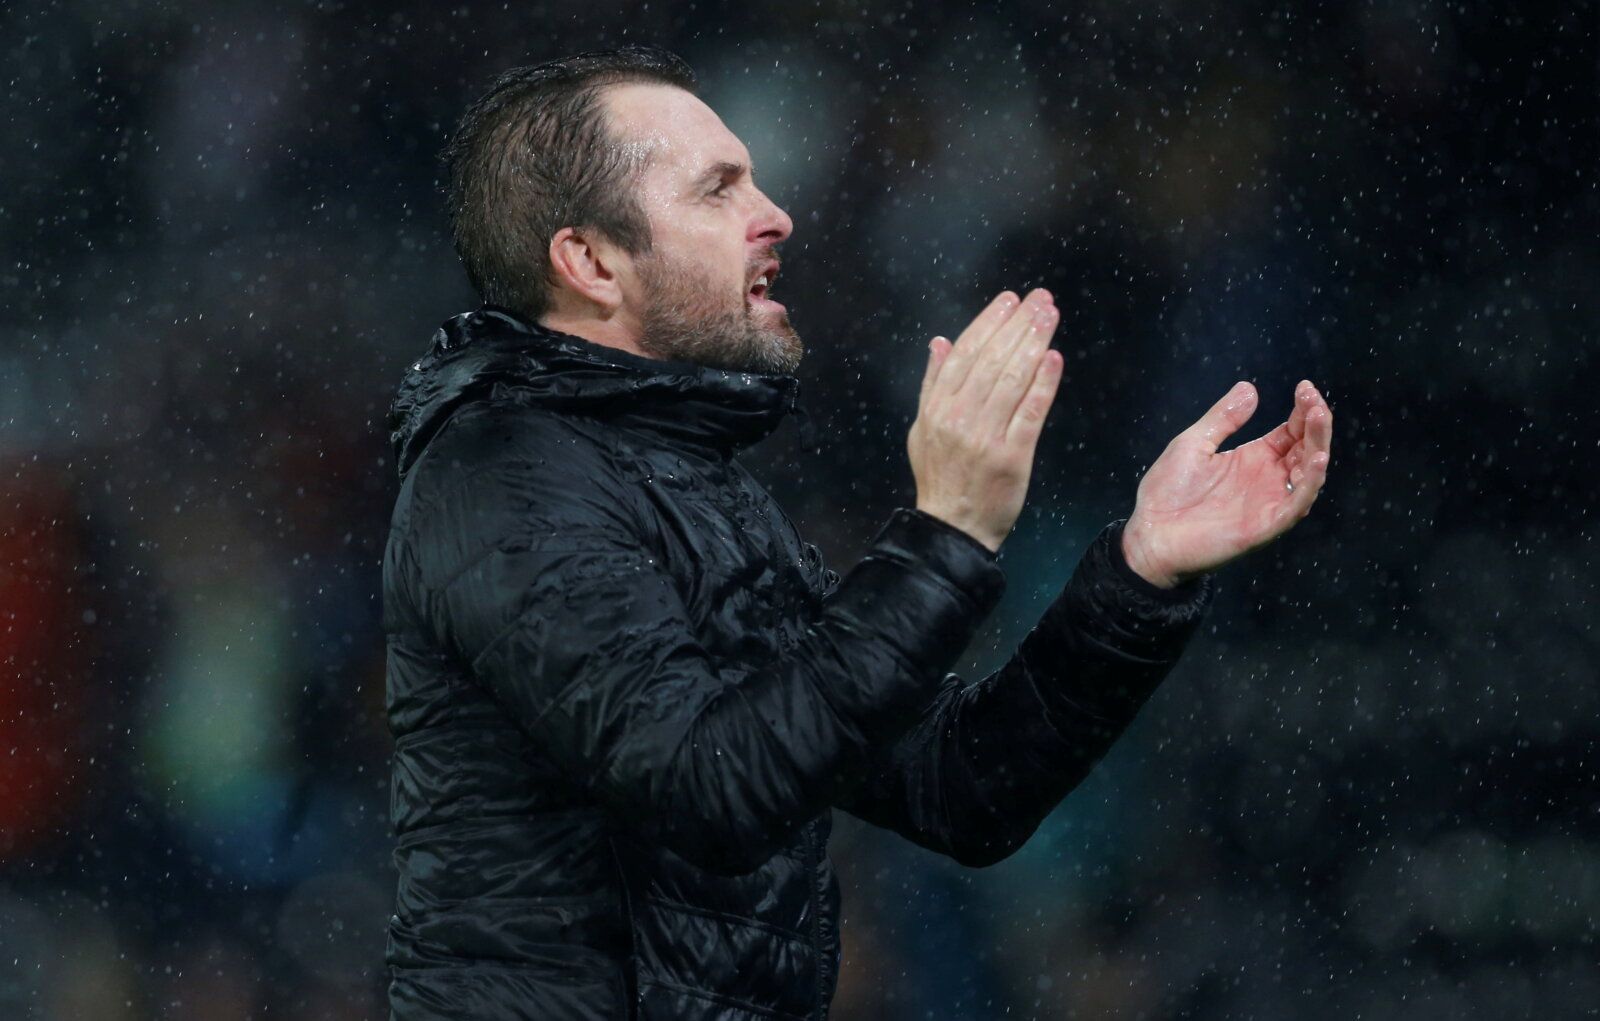 Soccer Football - Championship - Derby County v Luton Town - Pride Park, Derby, Britain - October 19, 2021  Luton Town Manager Nathan Jones acknowledges the fans after the match   Action Images/Craig Brough    EDITORIAL USE ONLY. No use with unauthorized audio, video, data, fixture lists, club/league logos or 